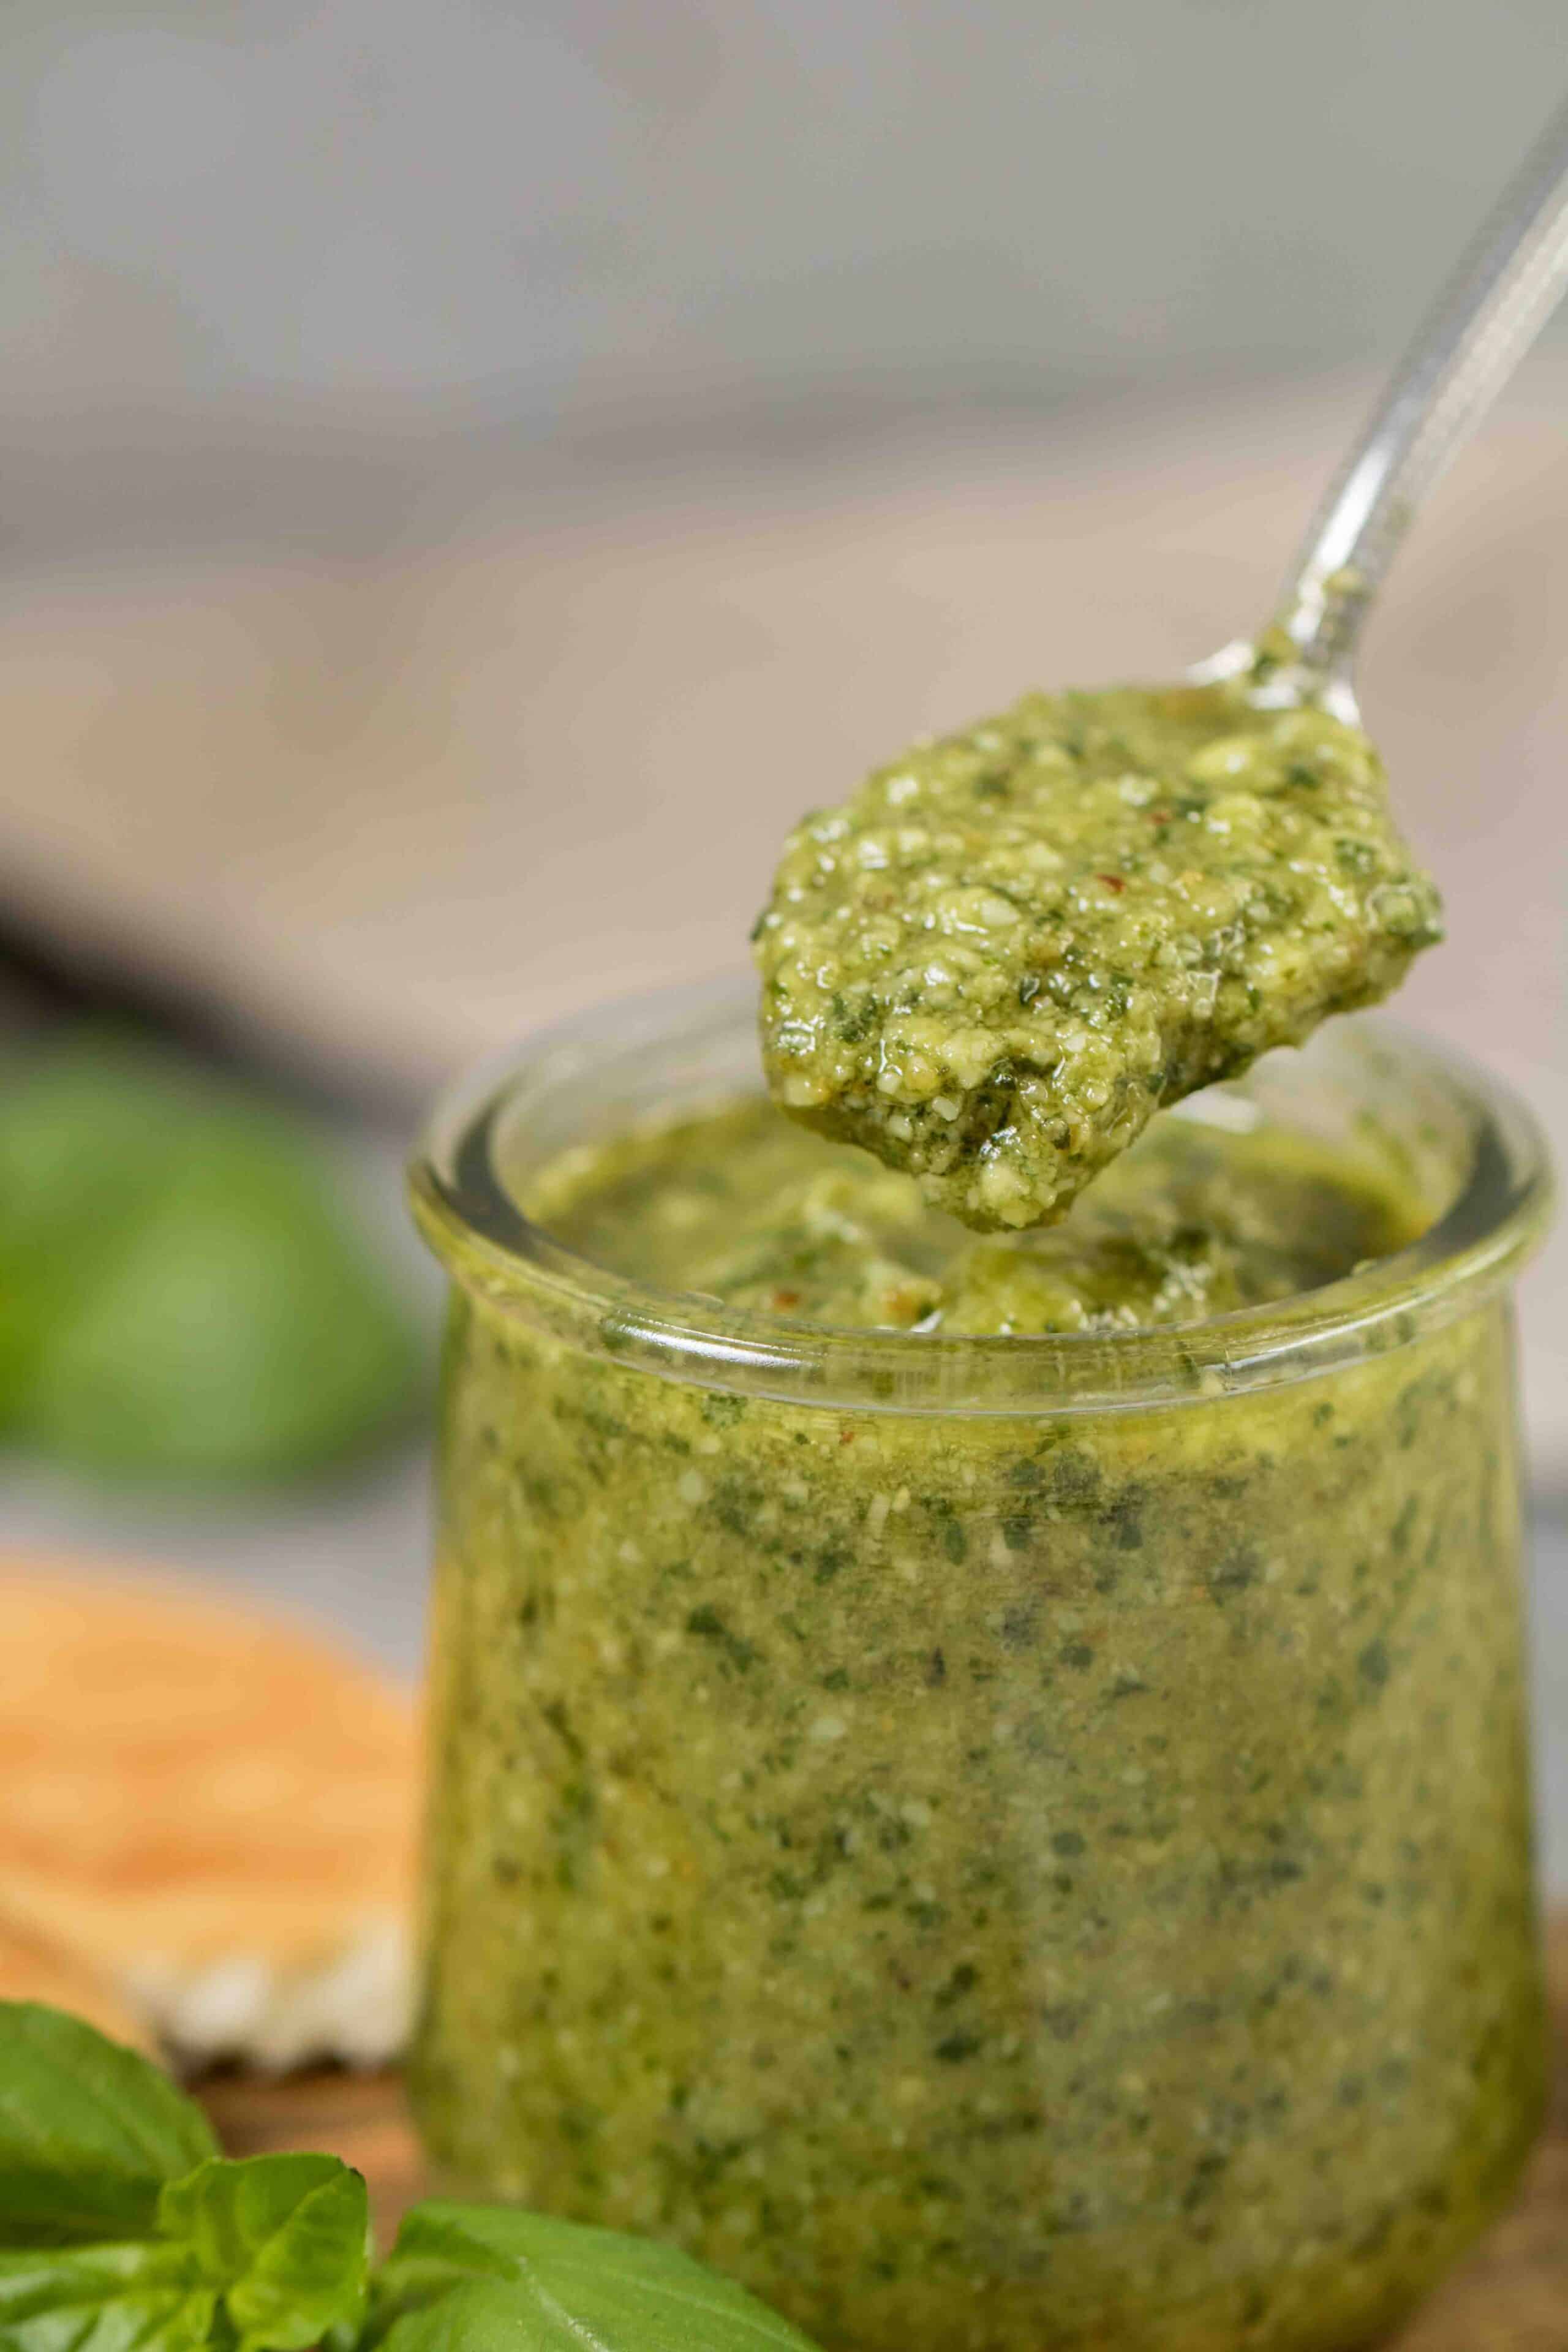 Spoon filled with creamy pesto sauce